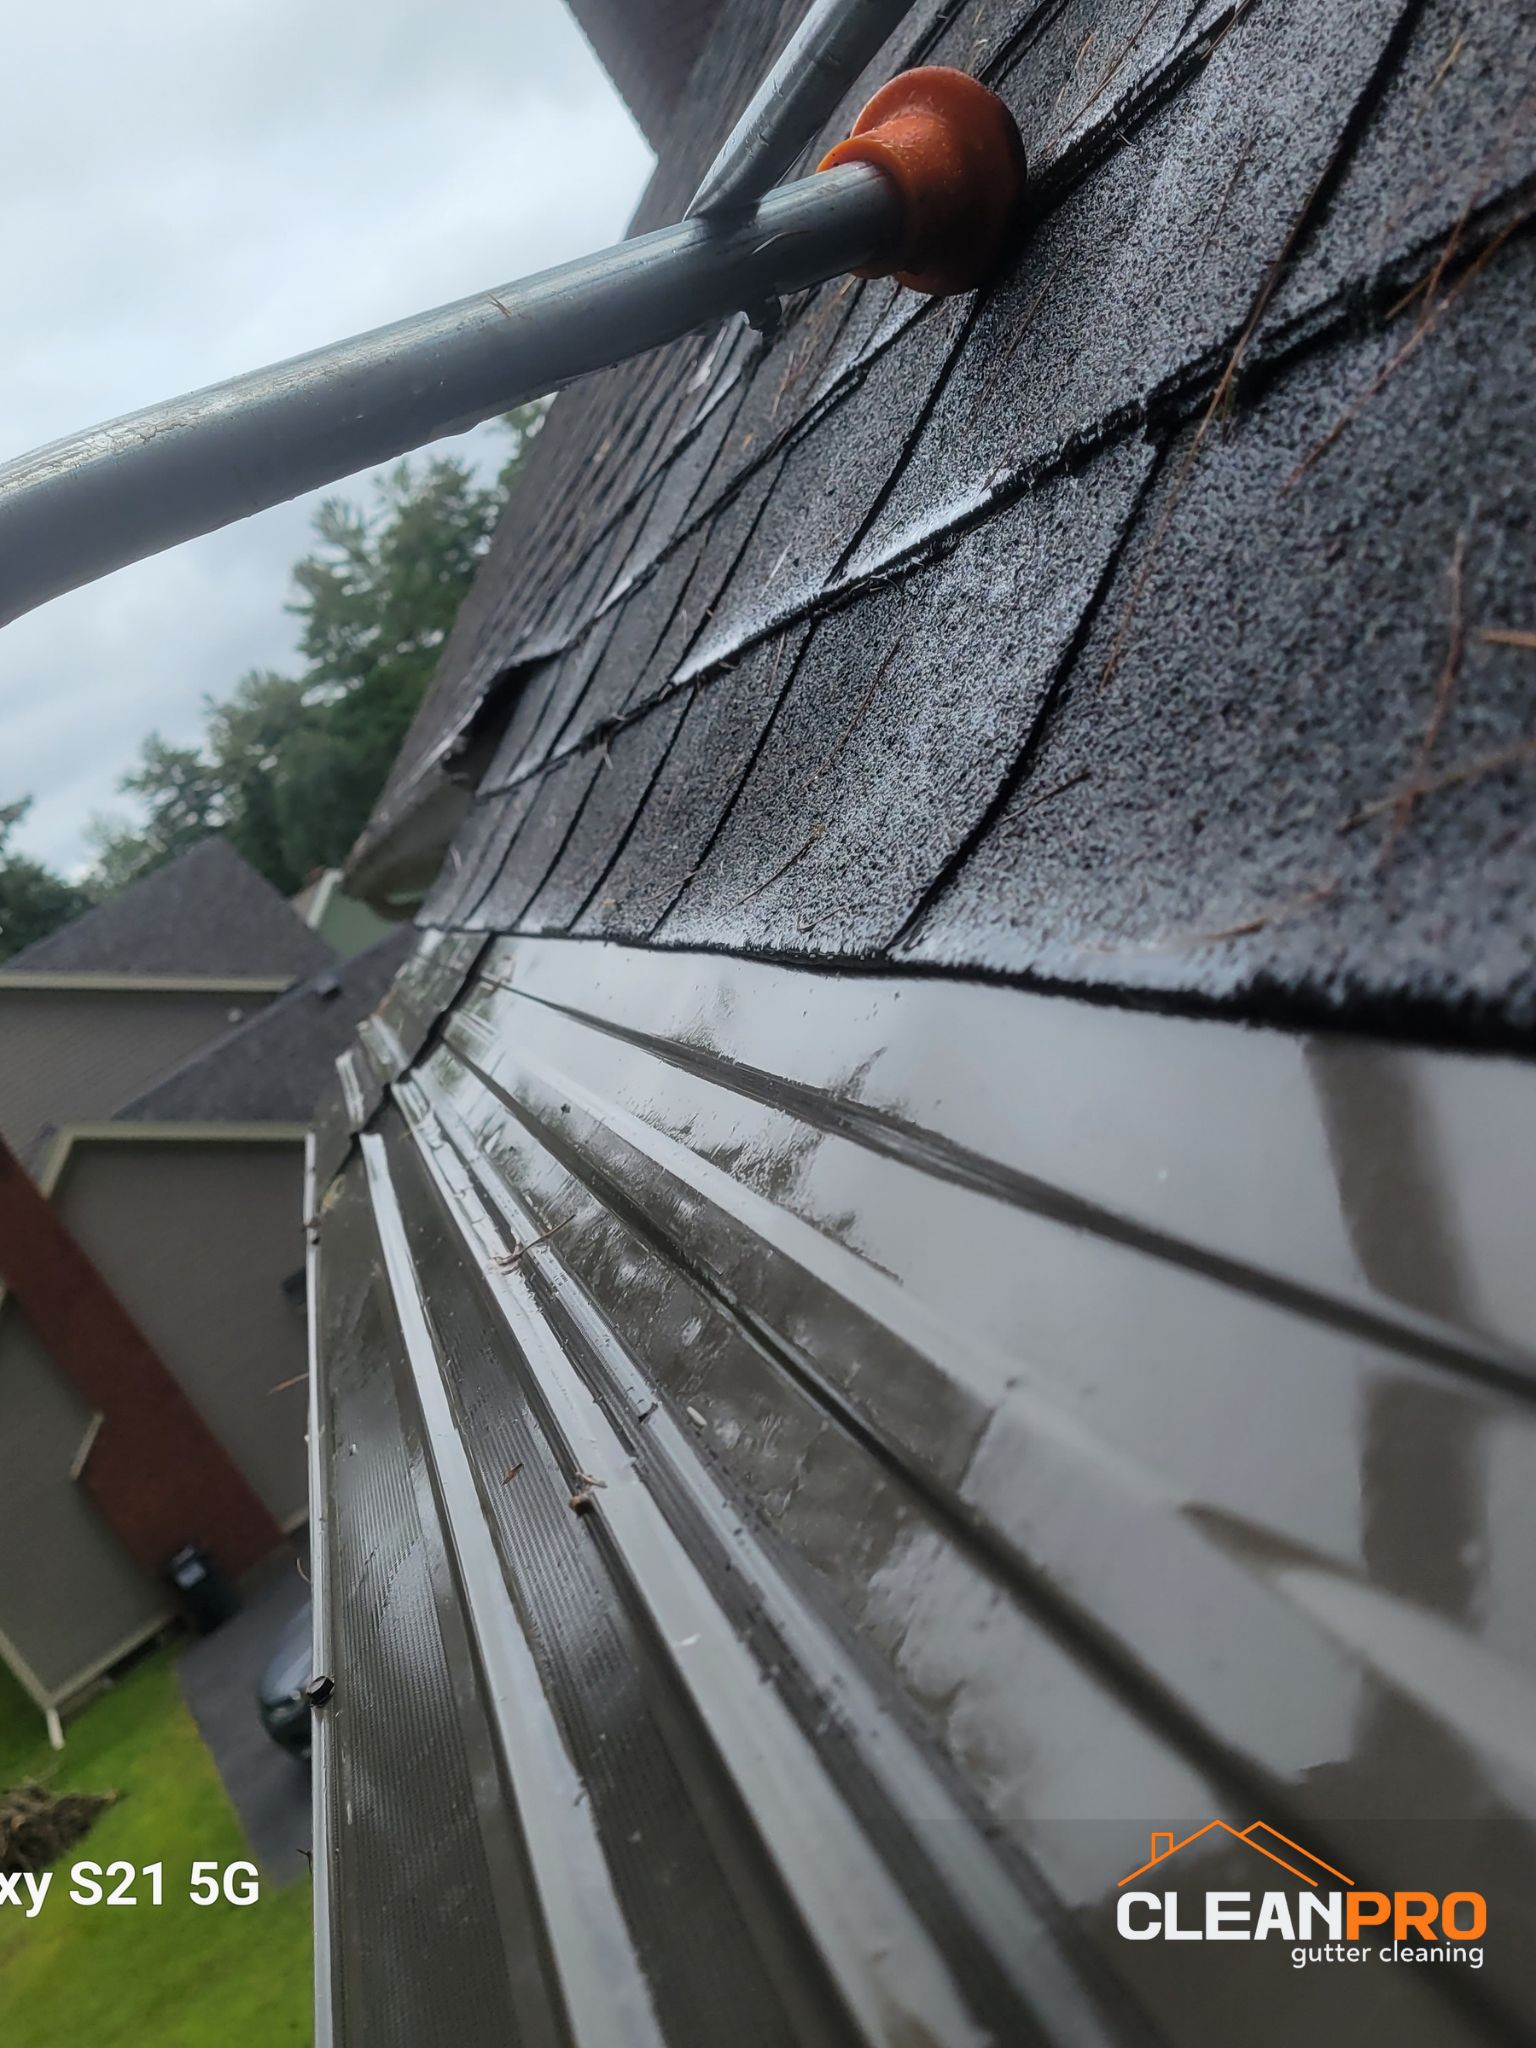 Gutter Cleaning in Chattanooga for Will Home